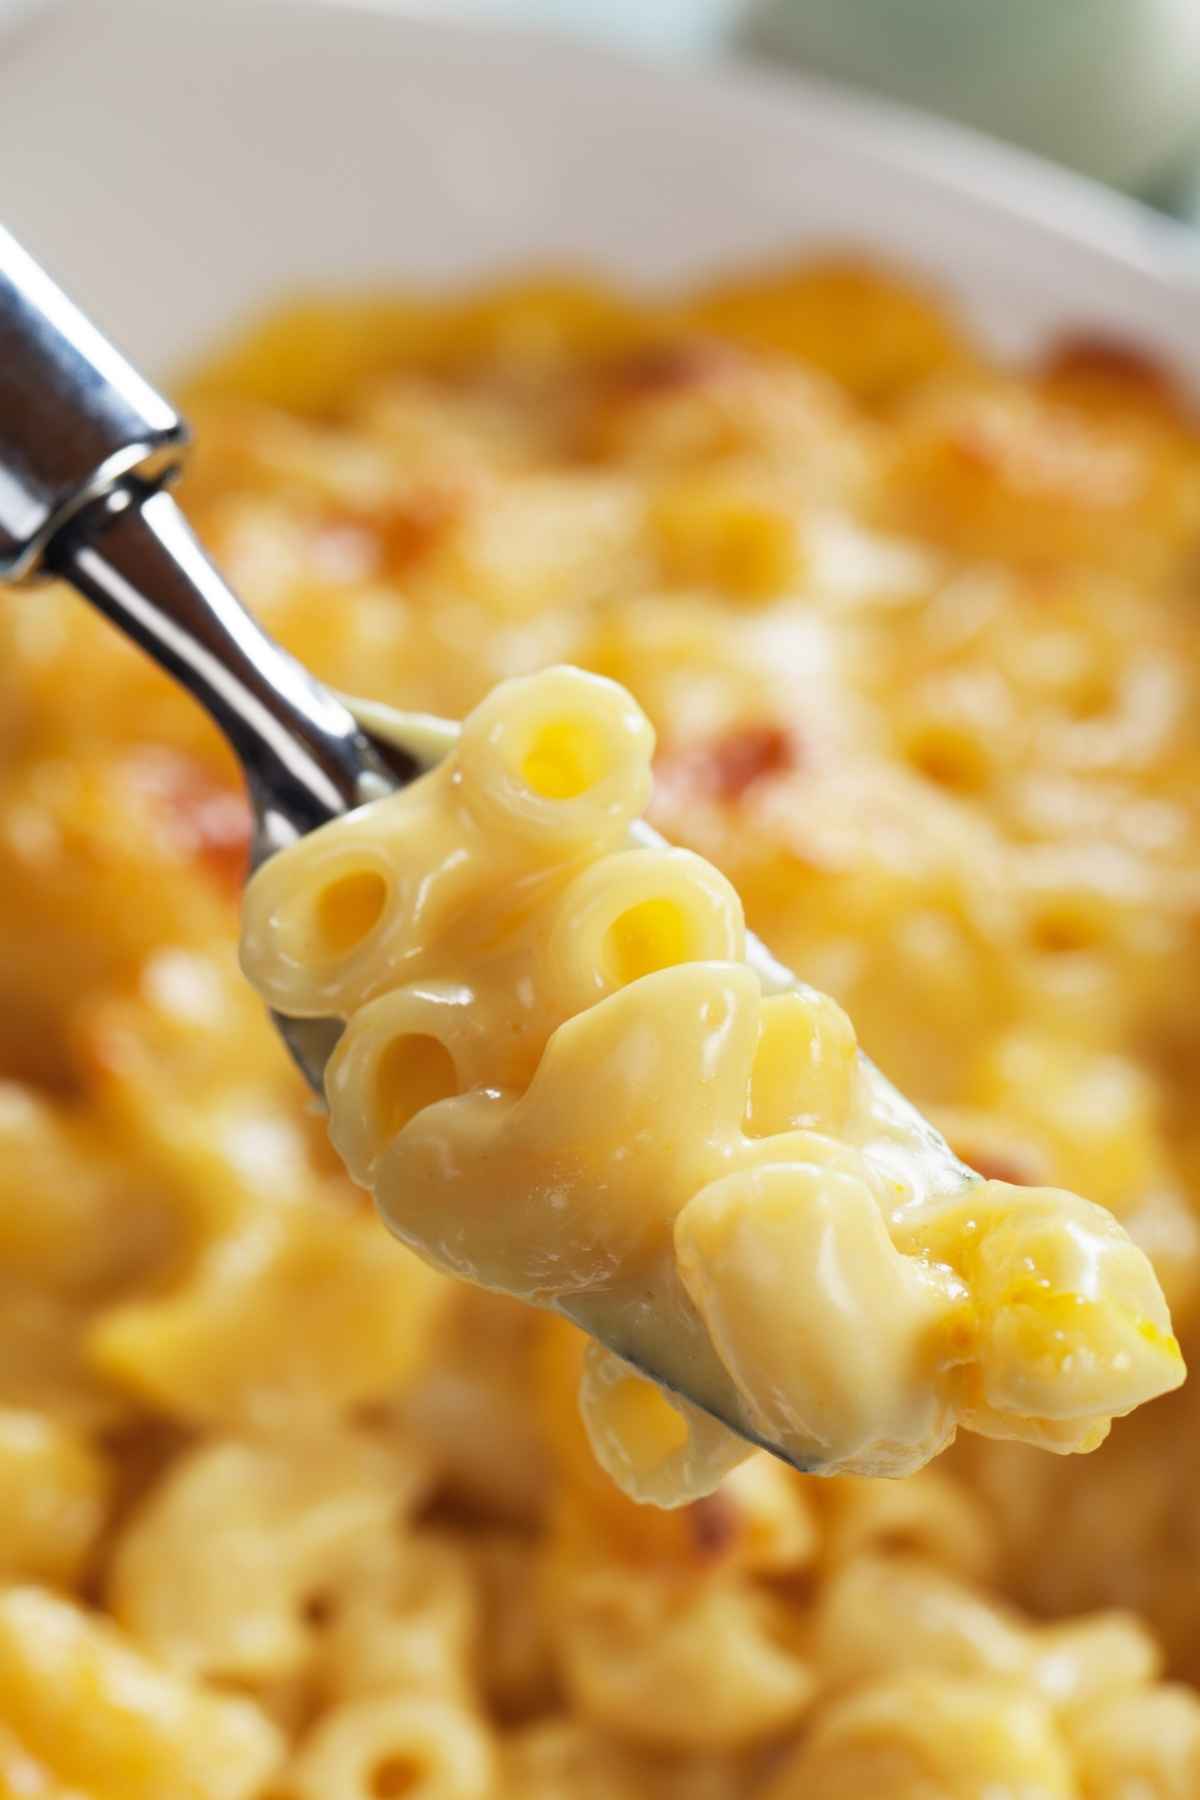 Learn How to Reheat Mac and Cheese, so it’s just as tender and creamy as it was the day you made it. Mac and Cheese is a classic favorite among pasta lovers. Its creamy texture and cheesy sauce pair well with a variety of meat and vegetables.